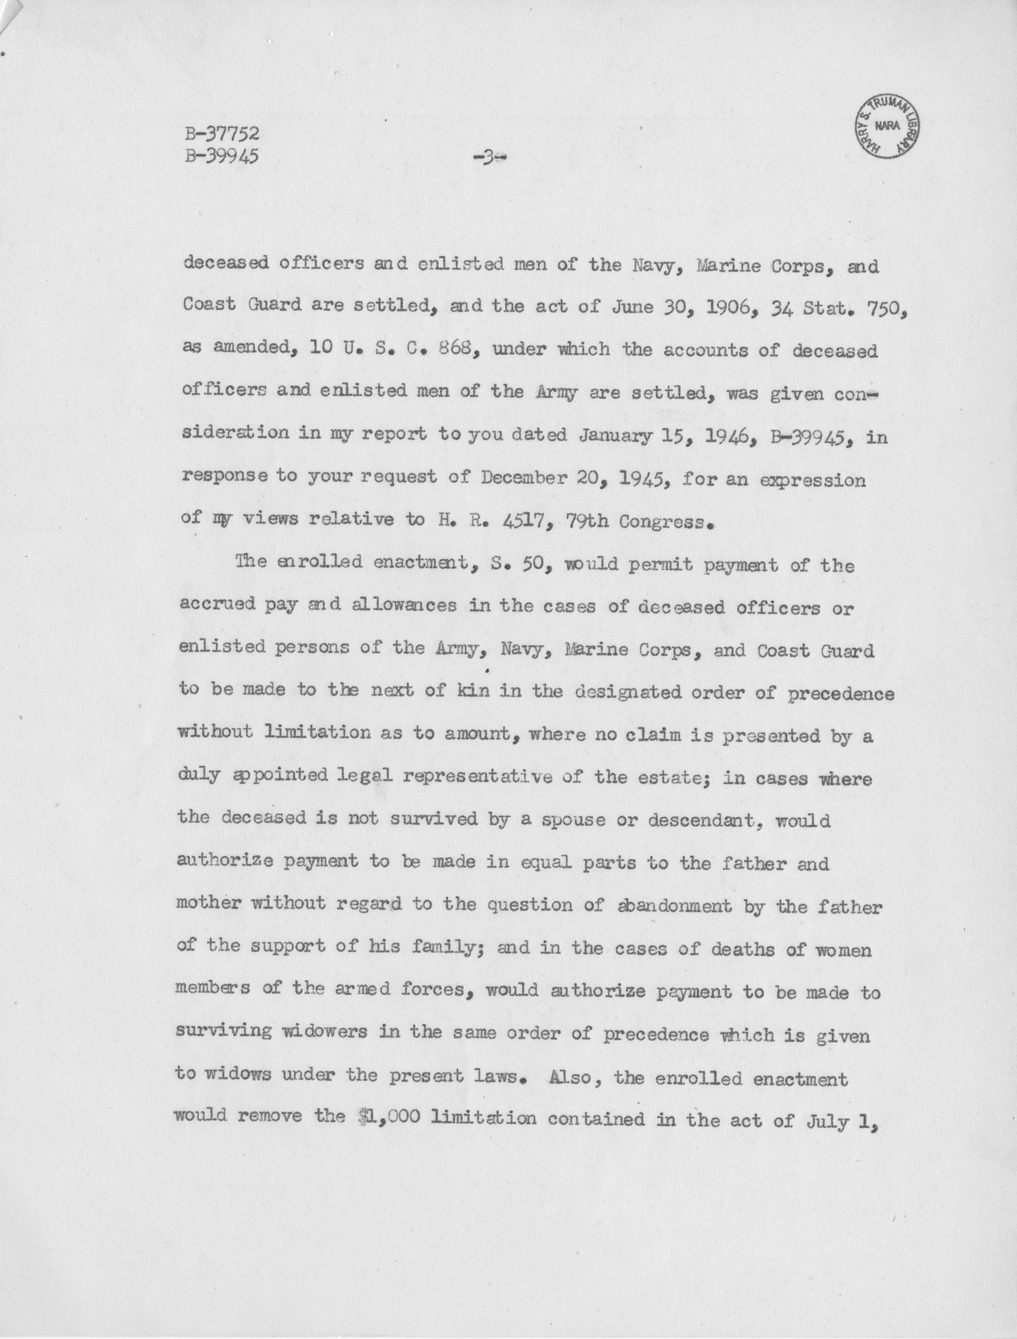 Memorandum from Paul H. Appleby to M. C. Latta, S. 50, To Permit Settlement of Accounts of Deceased Officers and Enlisted Men of the Army, Navy, Marine Corps, and Coast Guard, and of Deceased Commissioned Officers of the Public Health Service, Without Administration of Estates, with Attachments